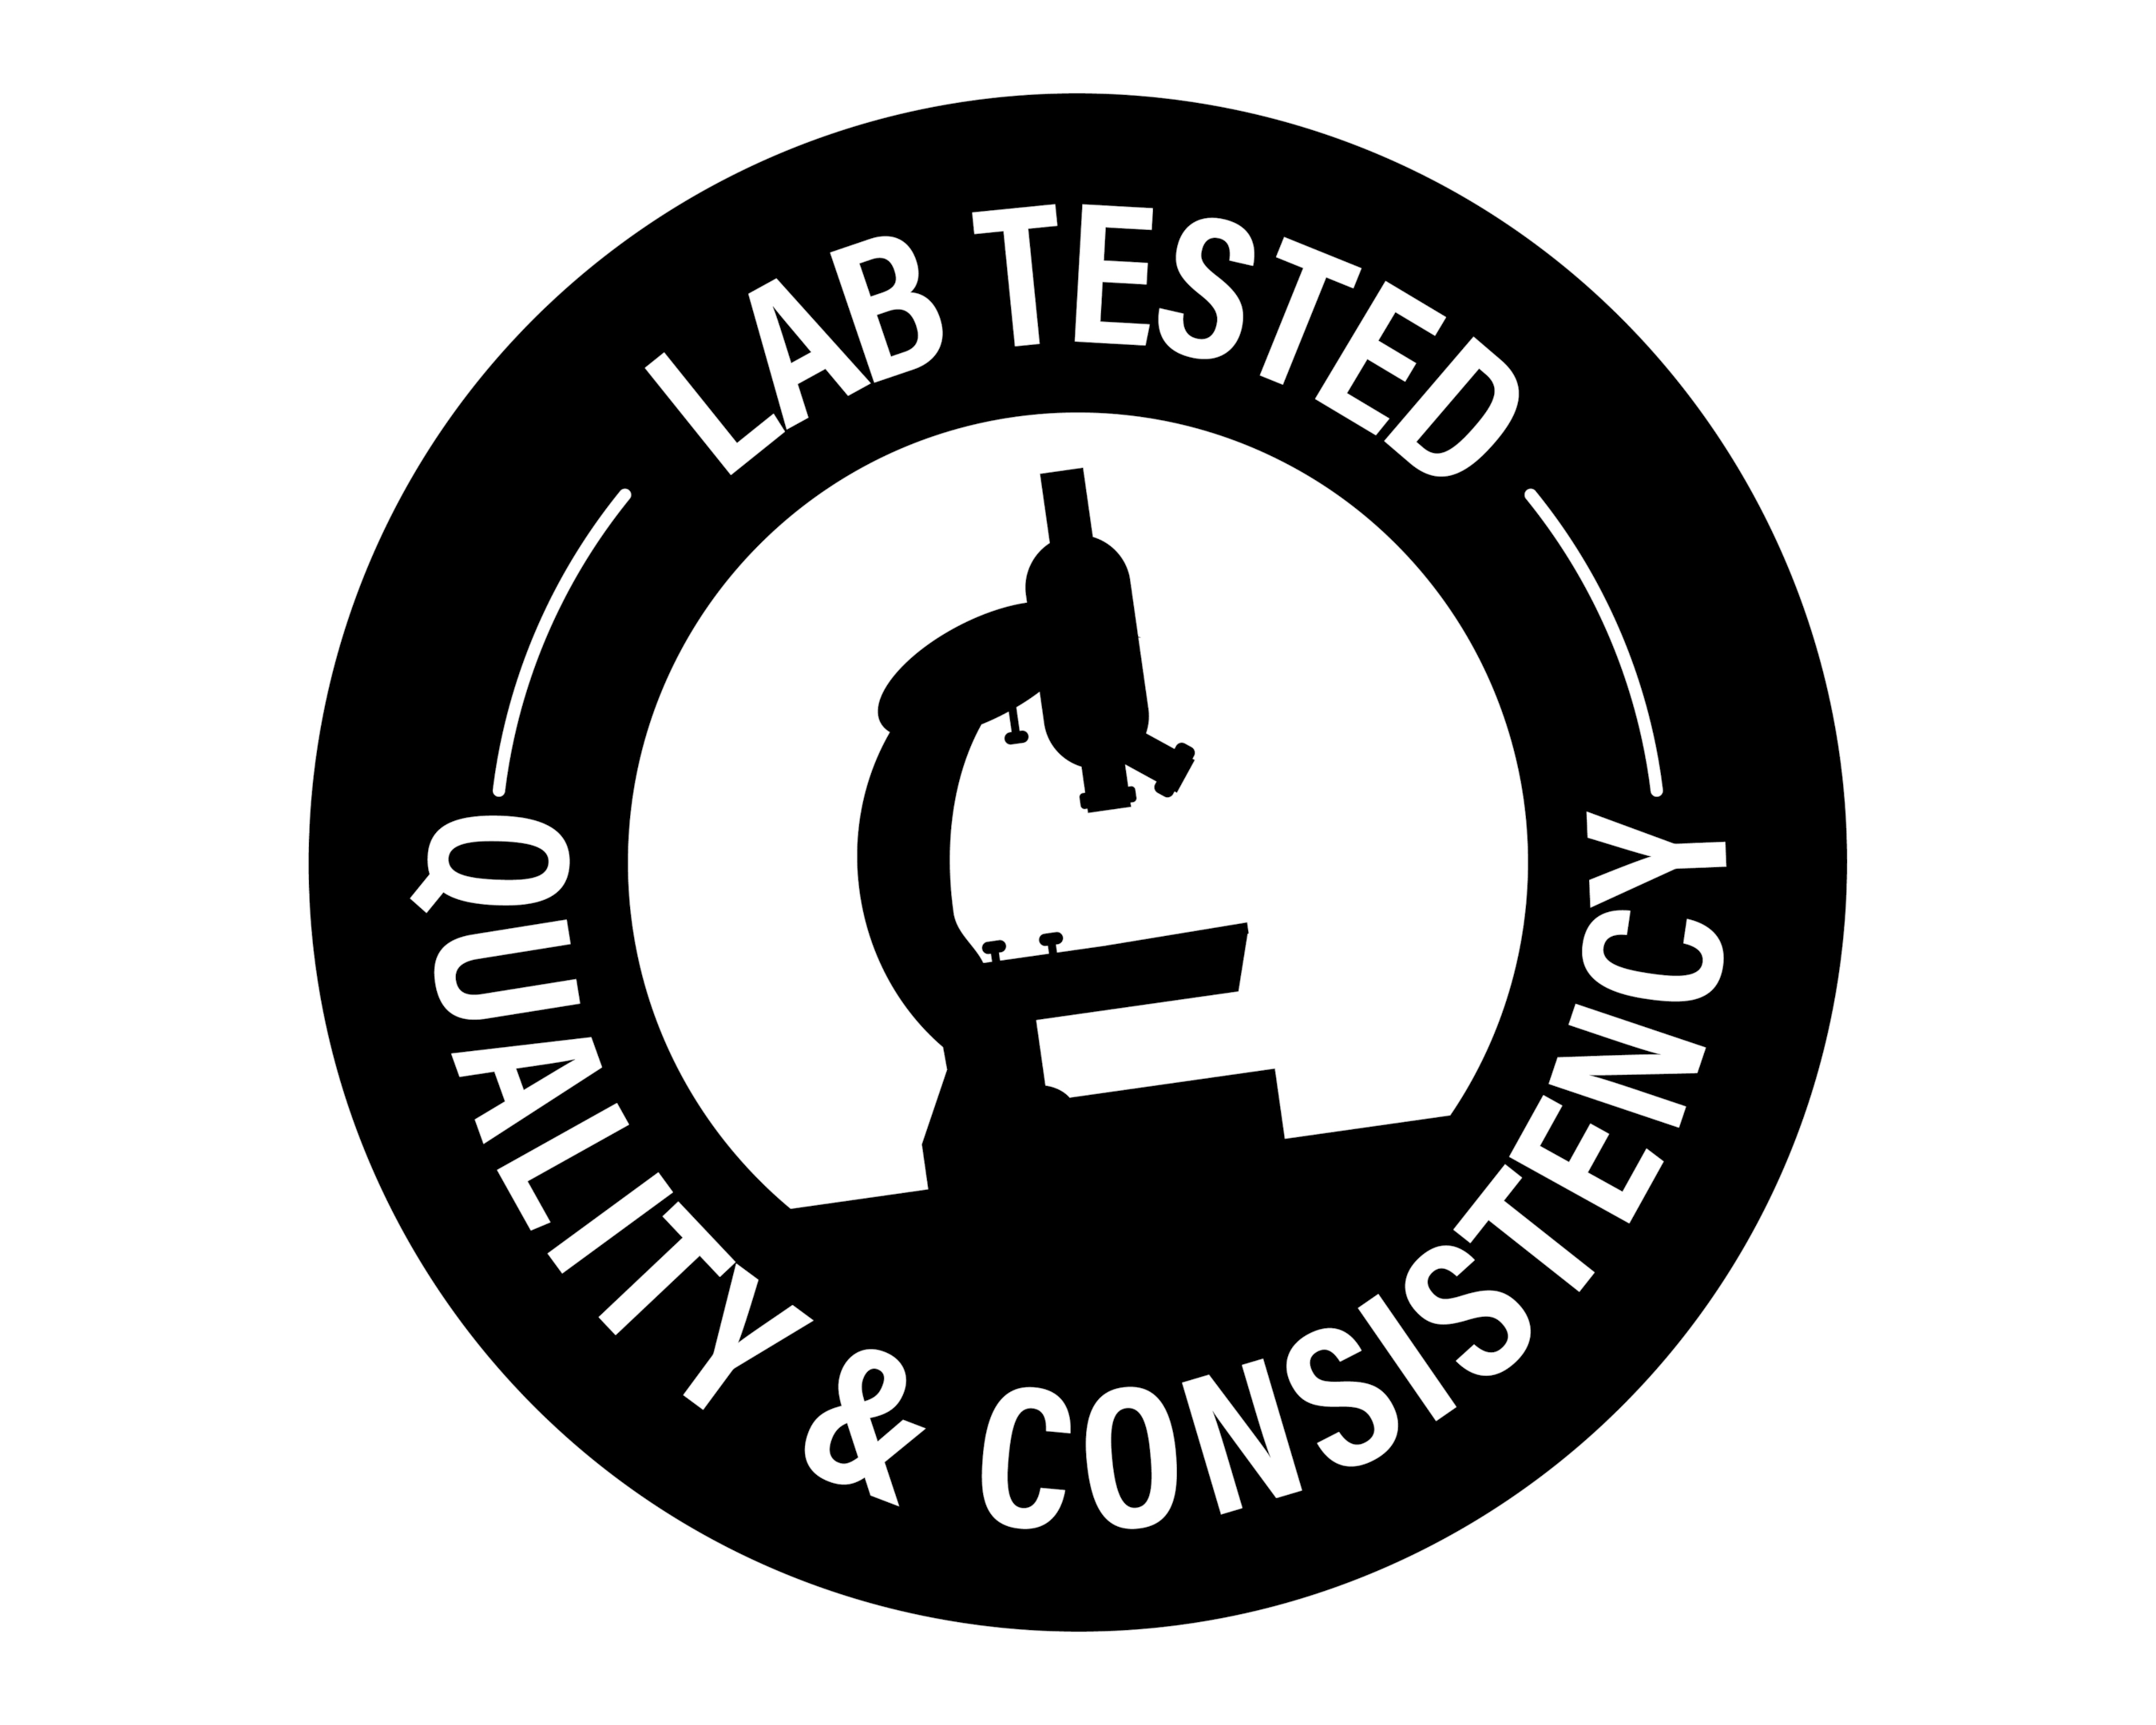 Every product is tested in-house and then sent to a DEA accredited third party lab for further testing.